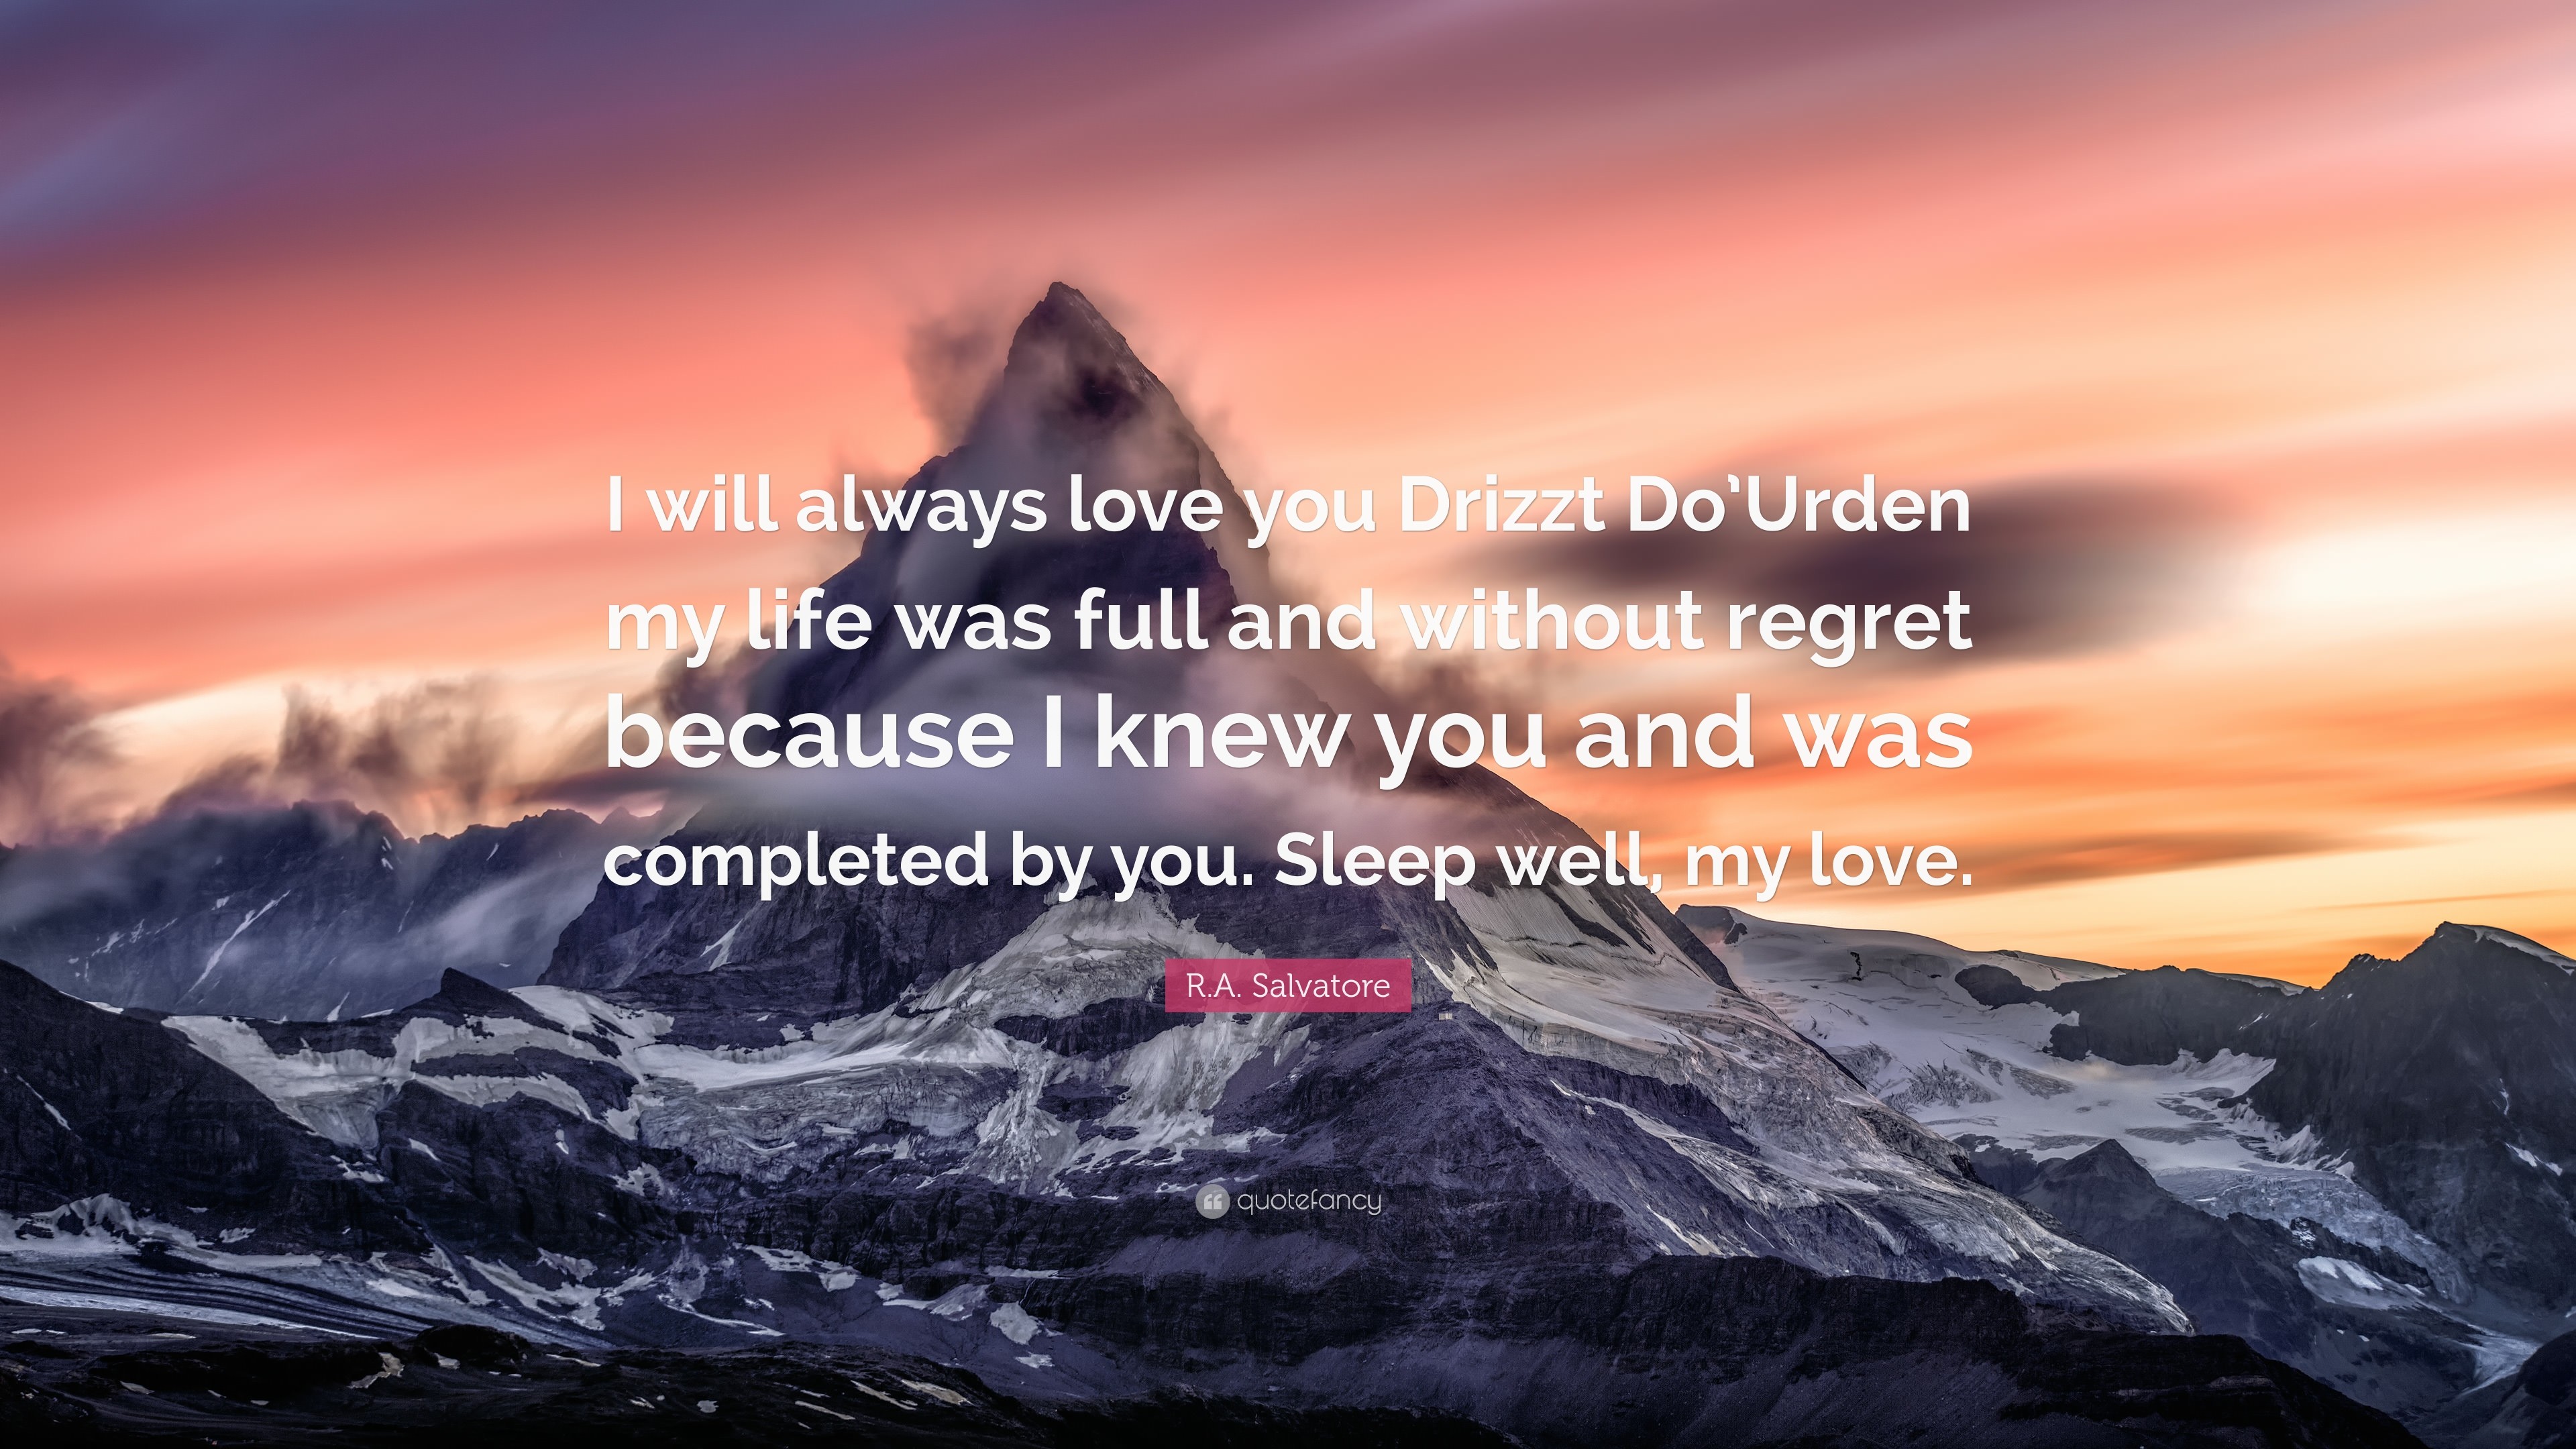 3840x2160 R.A. Salvatore Quote: “I will always love you Drizzt Do'Urden my life